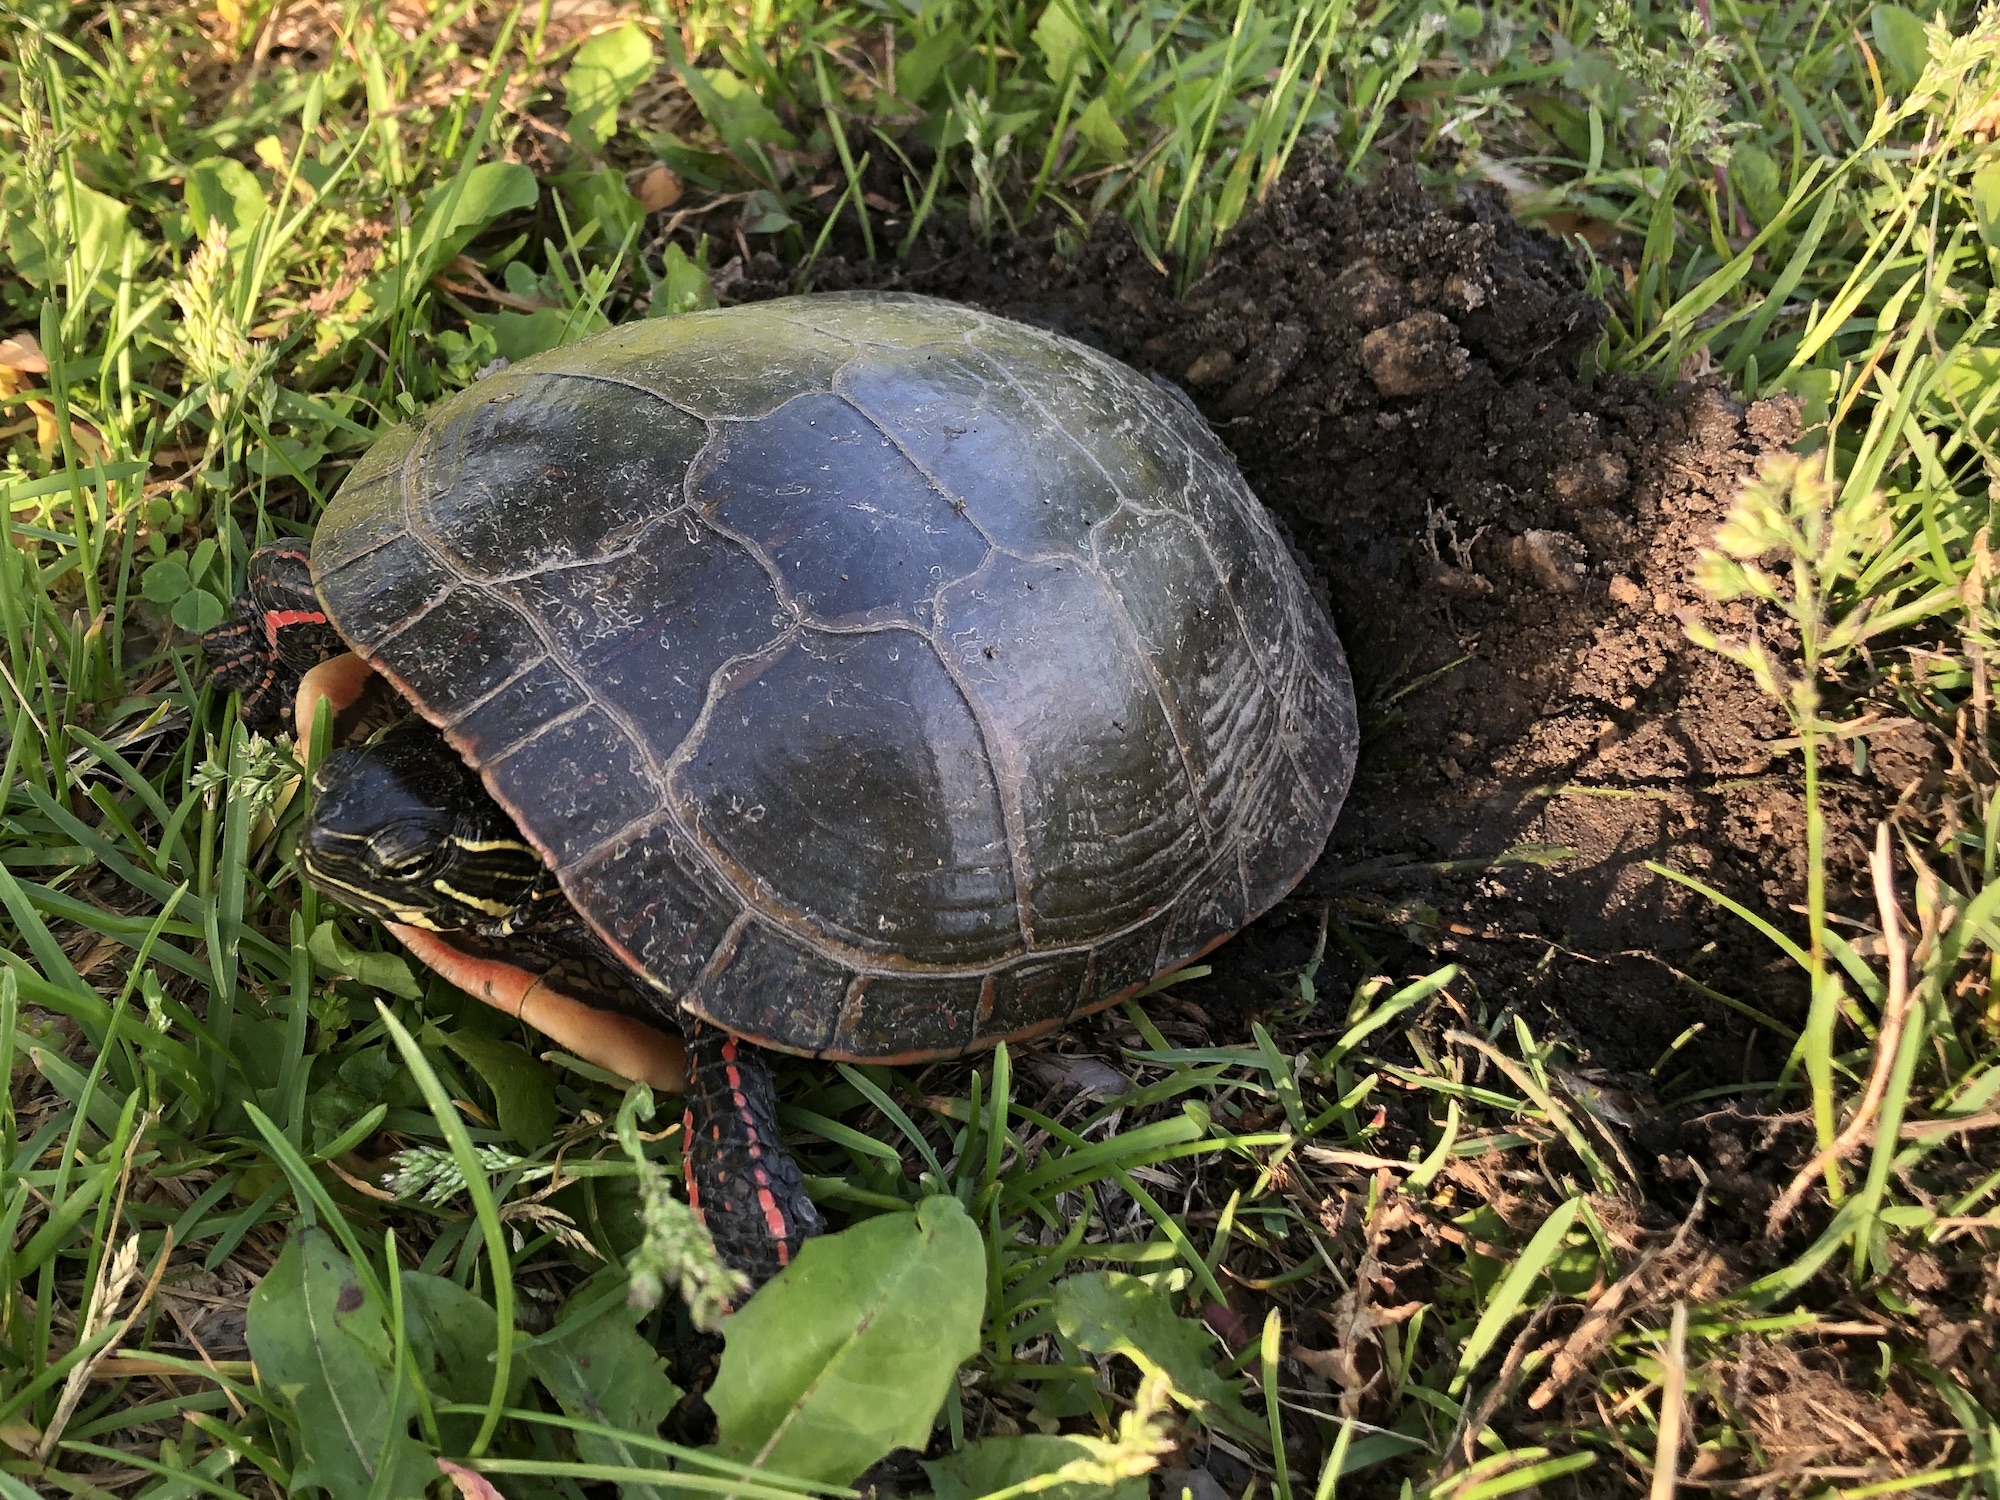 Painted Turtle laying eggs in E. Ray Stevens Aquatic Gardens in Madison, Wisconsin on June 9, 2022.